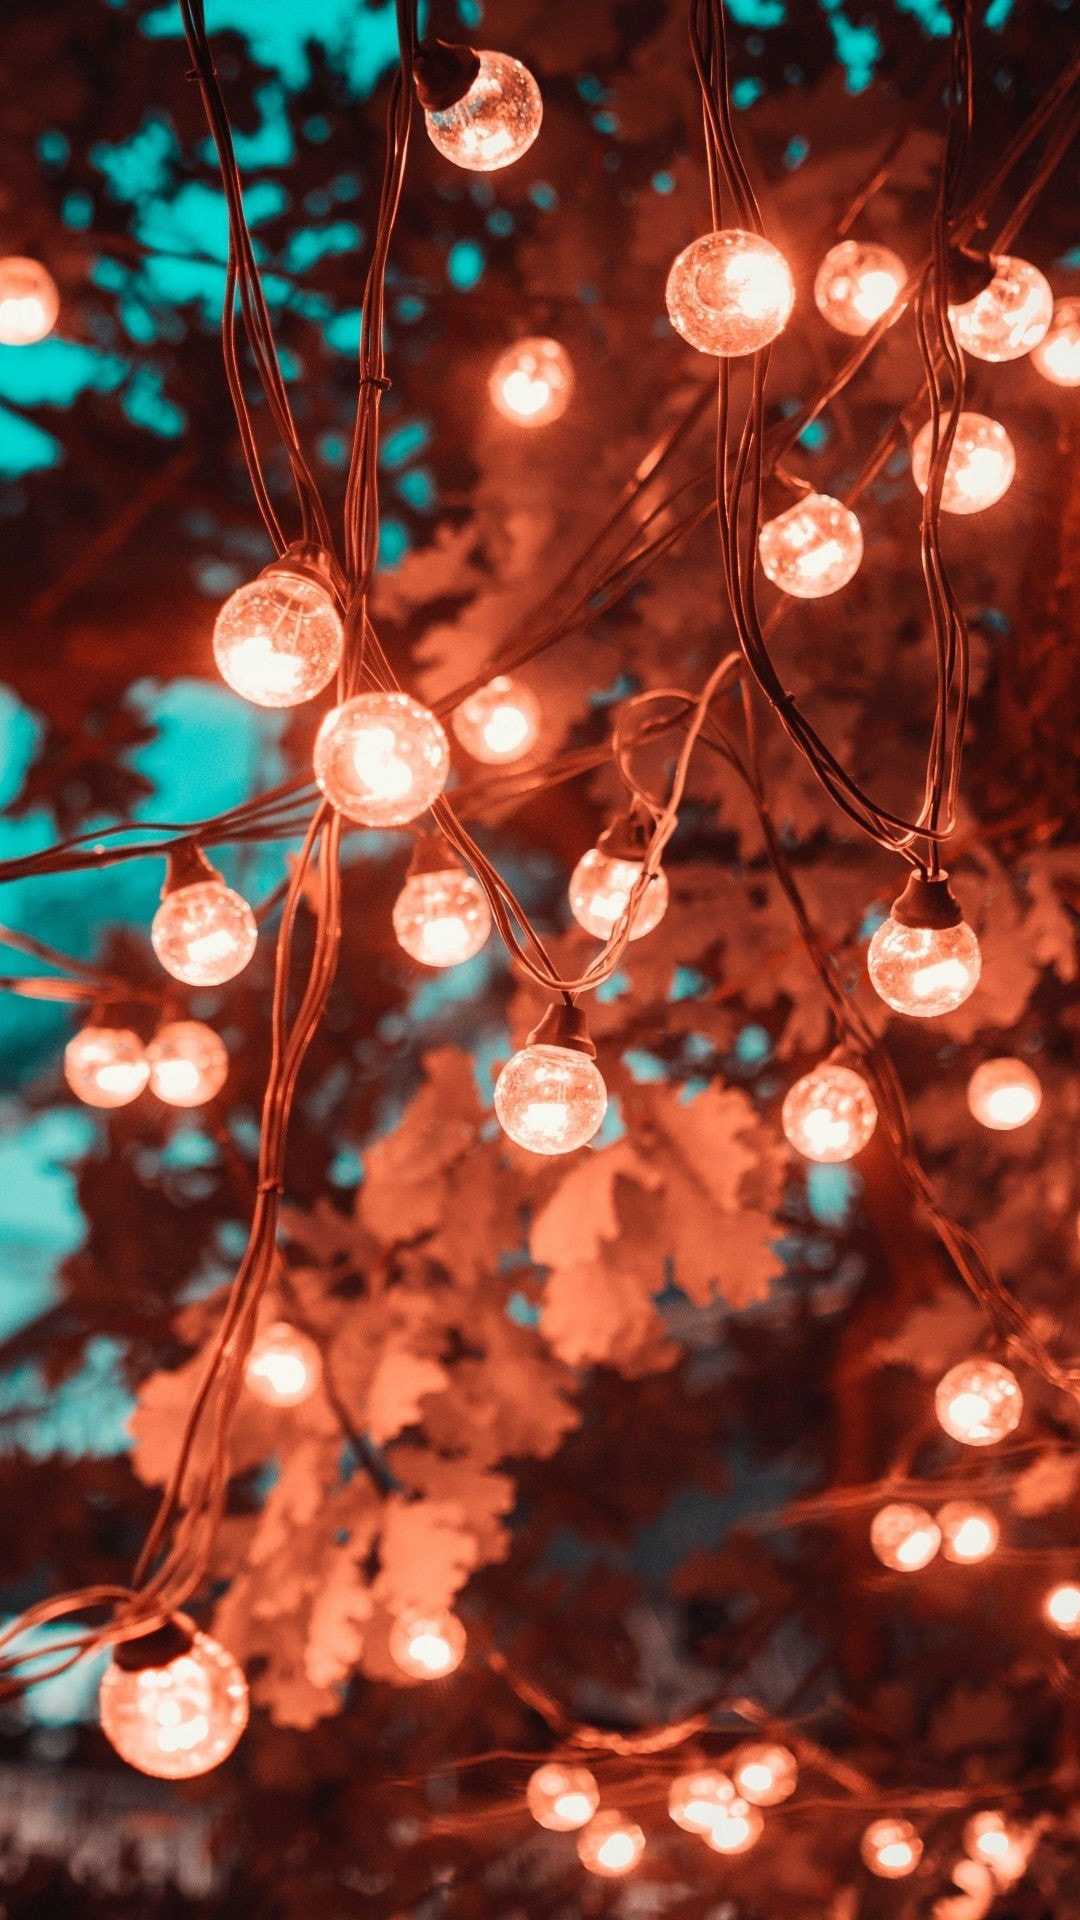 IPhone wallpaper of a string of lights in front of a tree - Fairy lights